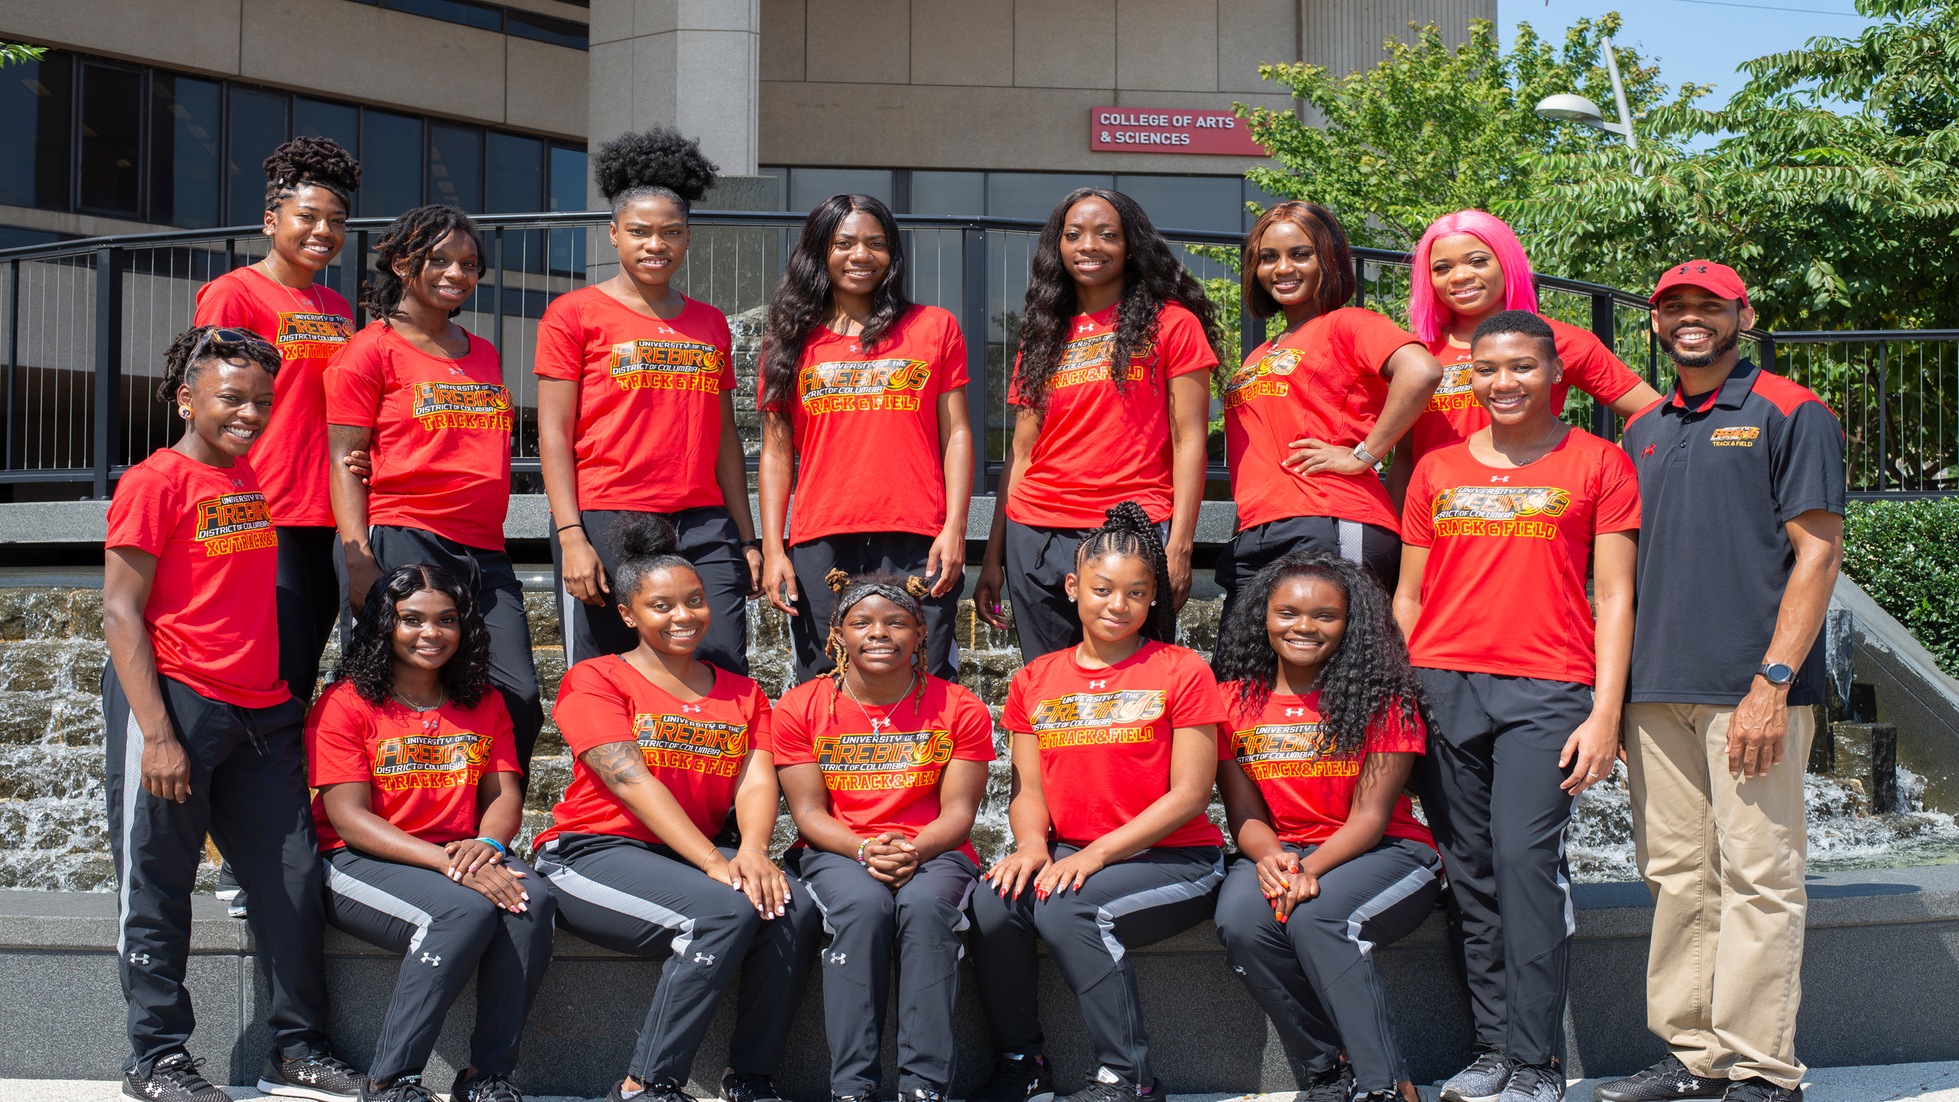 The 2019 Women's Cross Country Team